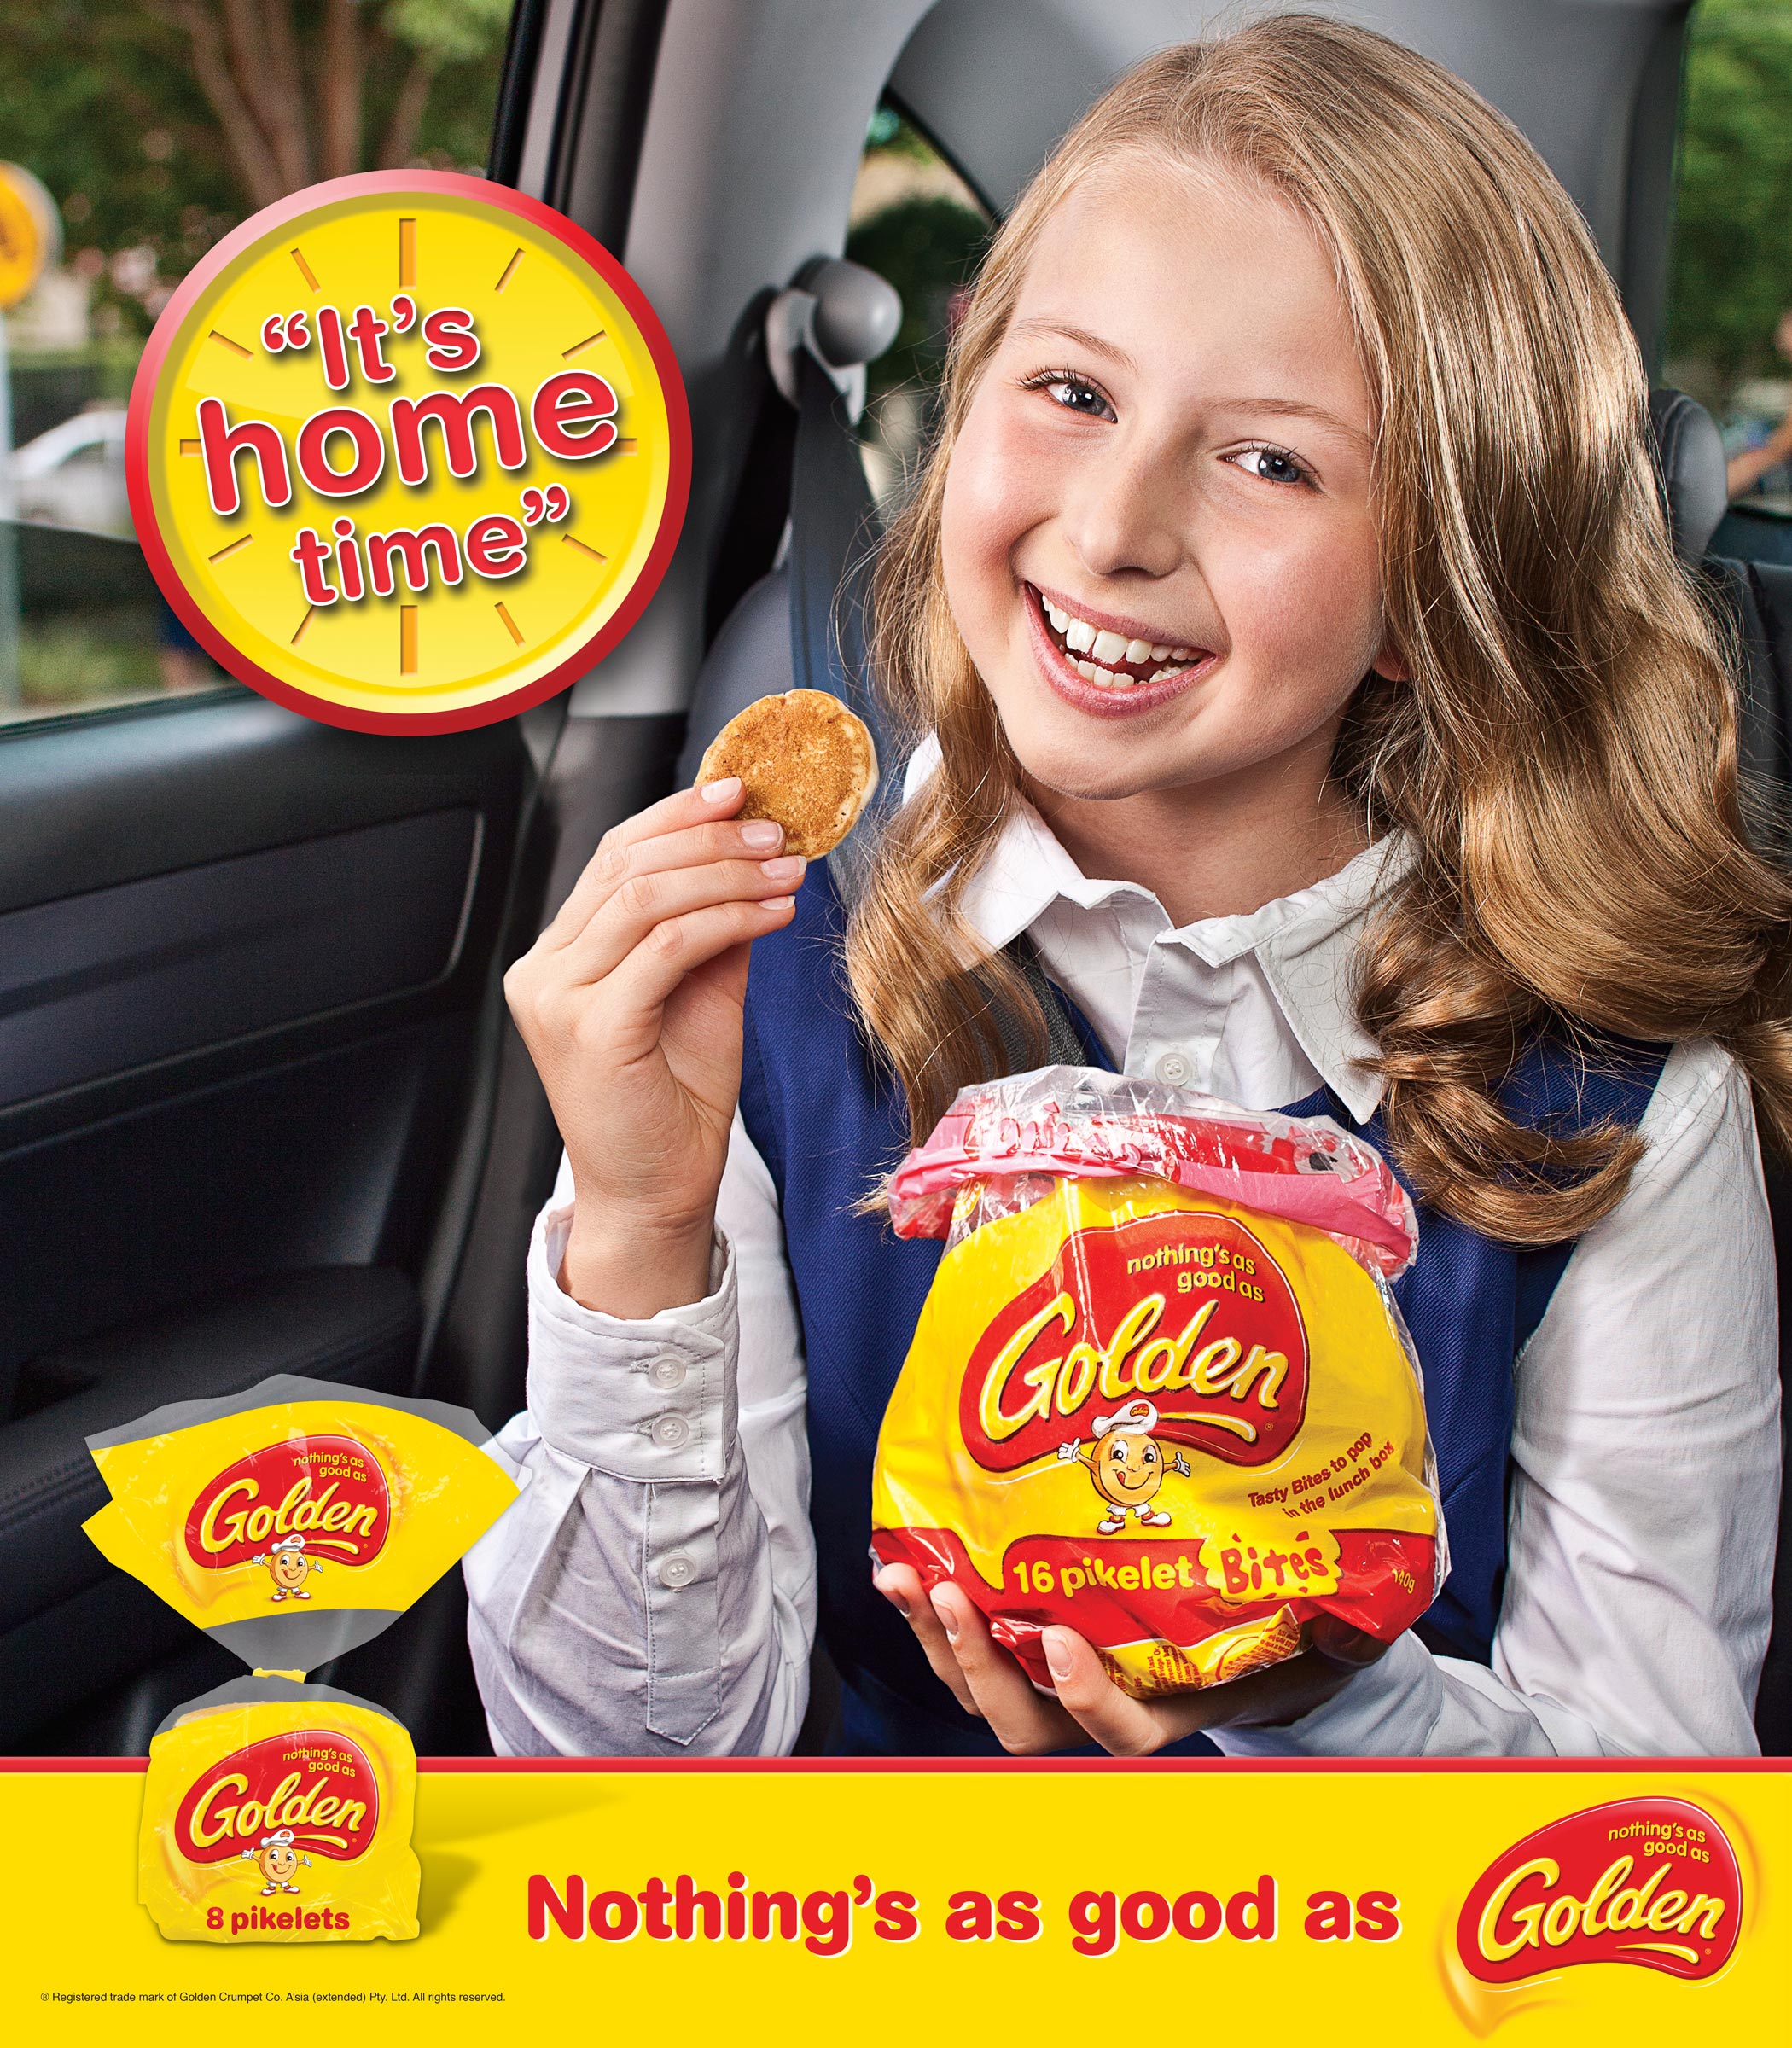 Advertising food product photography of young happy schoolgirl eating Golden pikelets in backseat of car